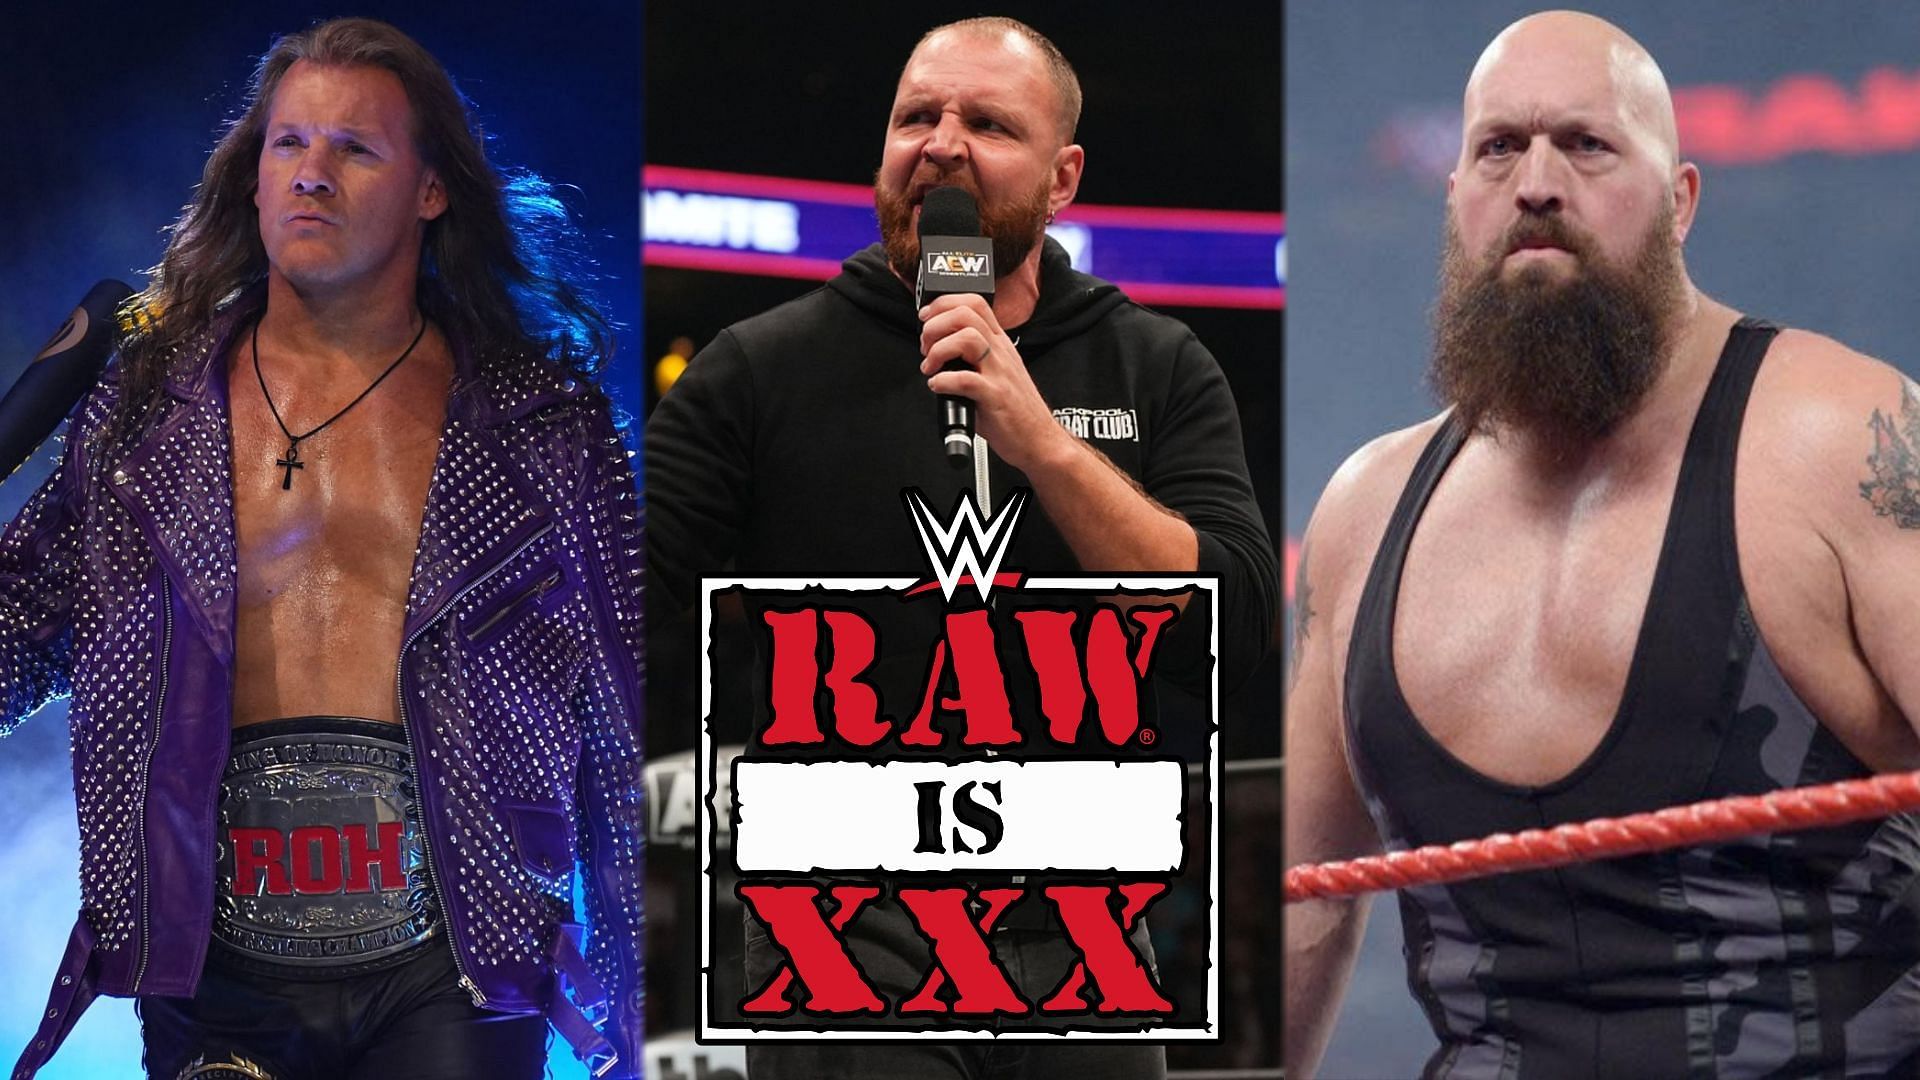 Could Chris Jericho, Jon Moxley, or Paul Wight appear on RAW XXX?